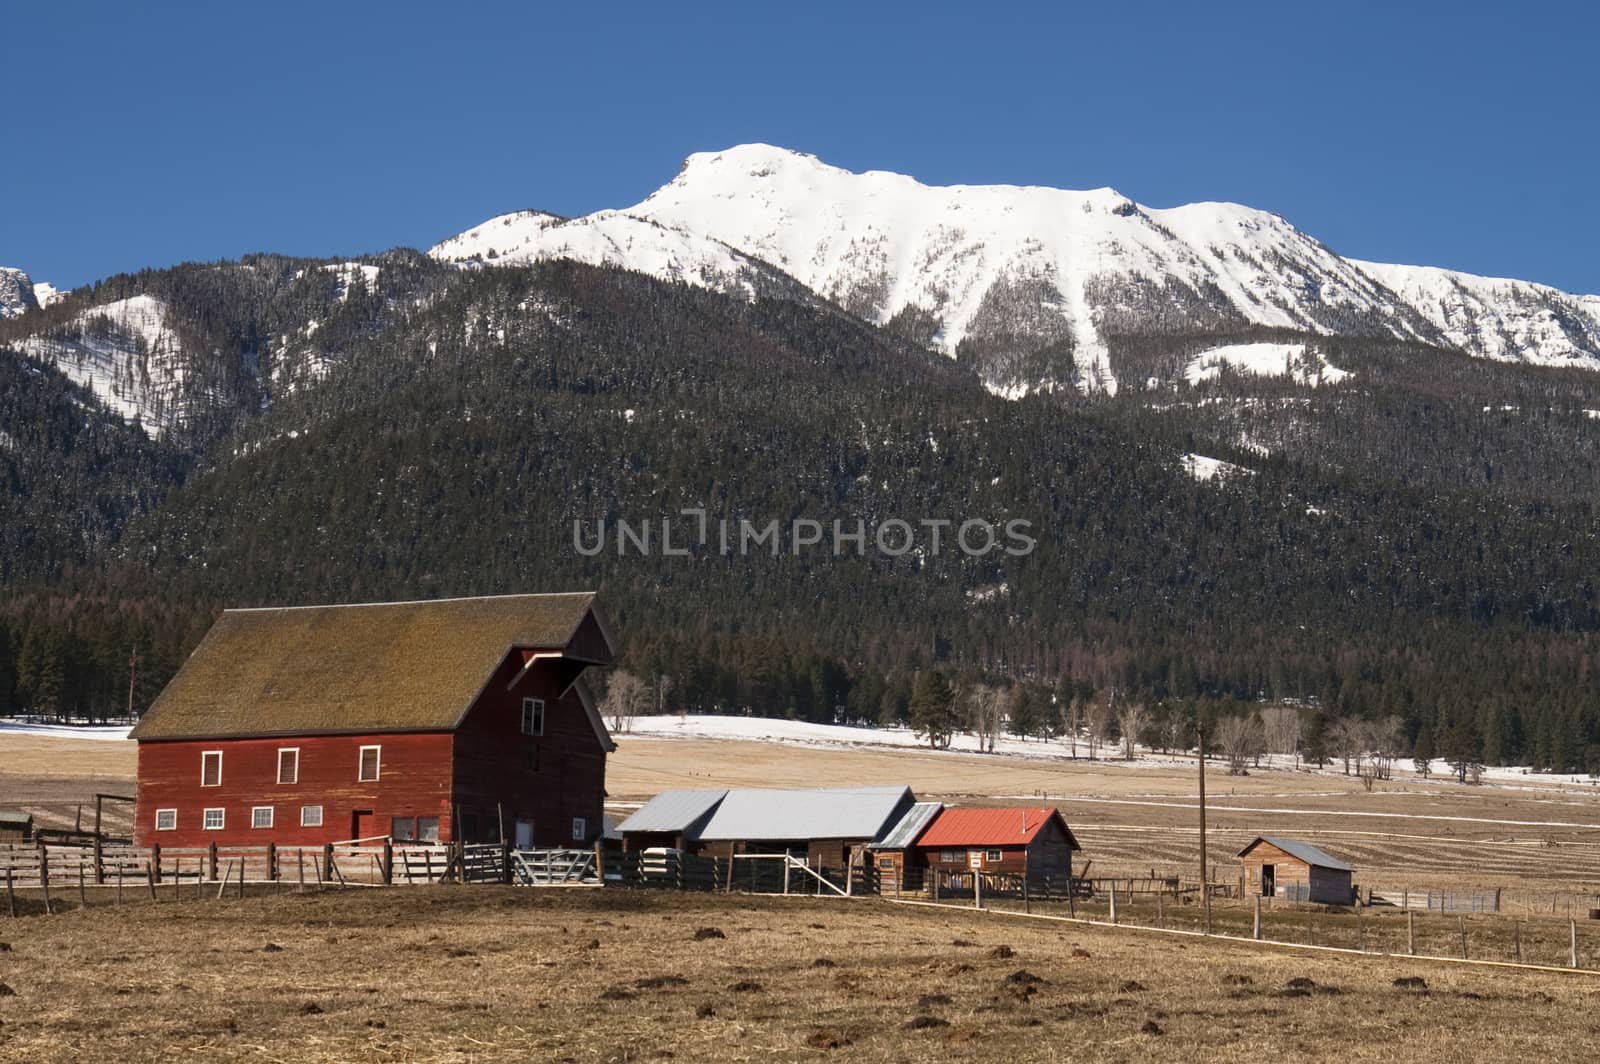 A red barn in early morning on the ranch against high mountain landscape